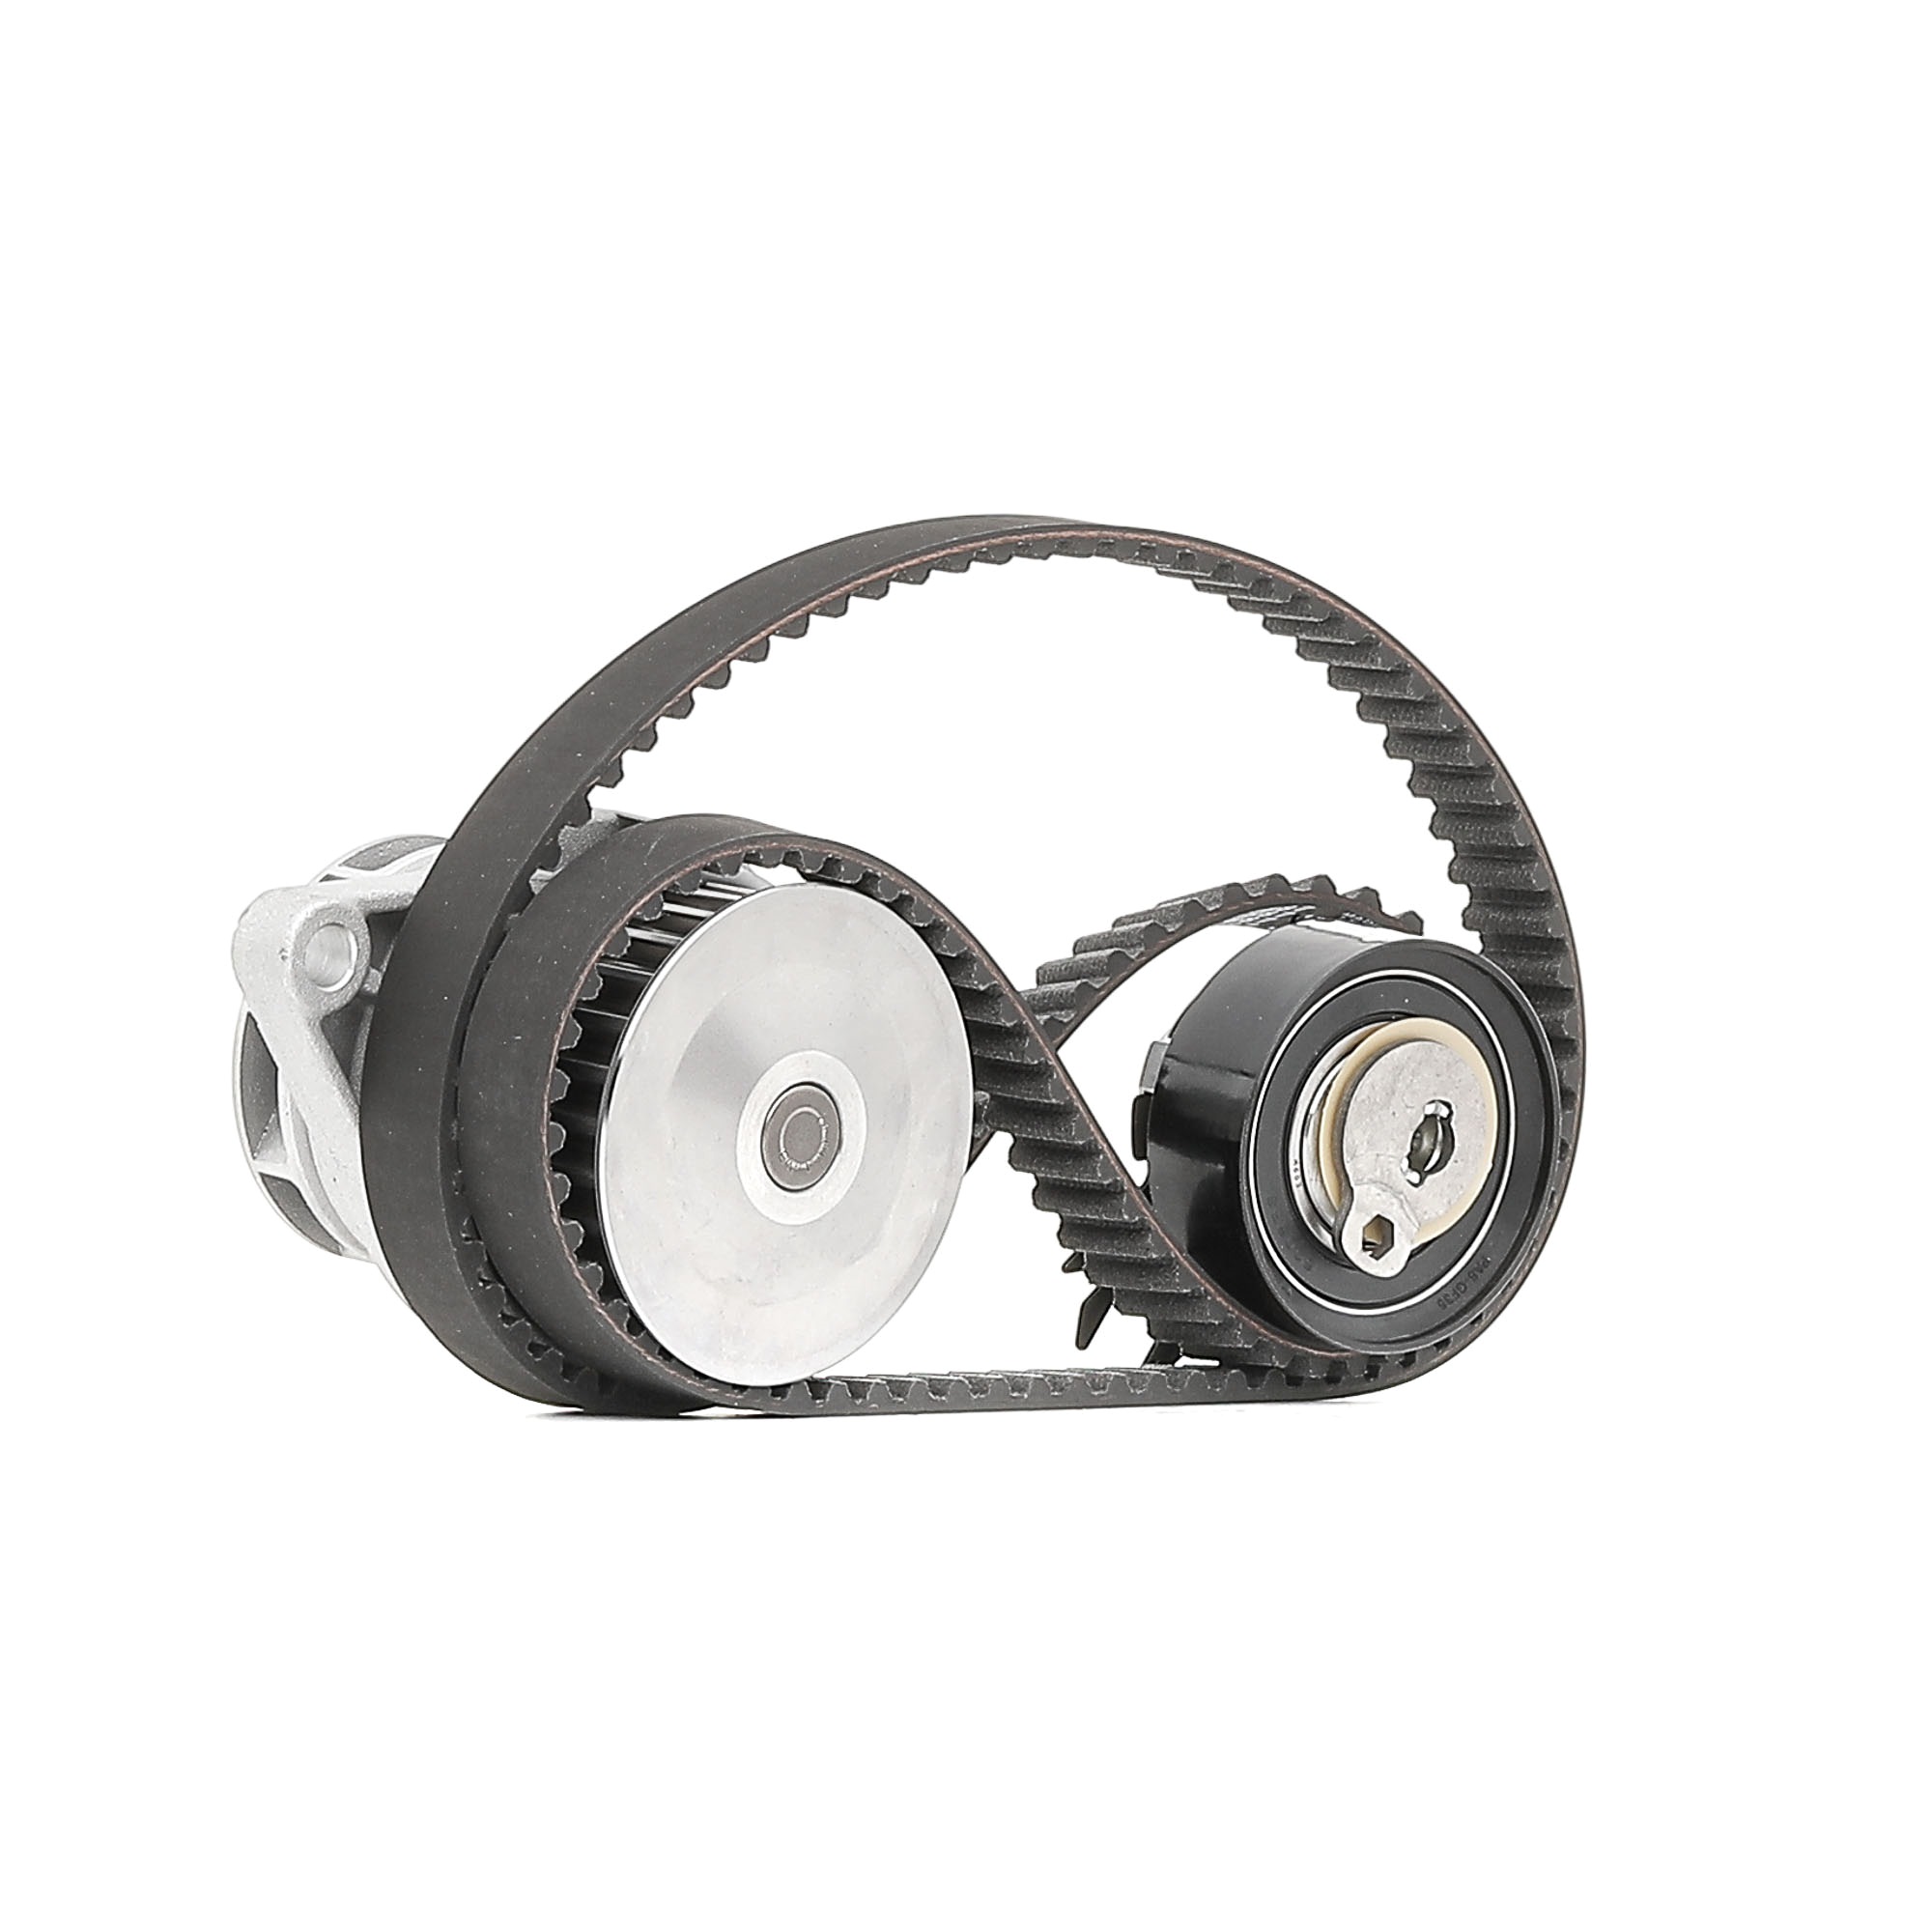 MAGNETI MARELLI 132011160007 Water pump and timing belt kit Number of Teeth: 137 L: 1096 mm, Width: 19 mm